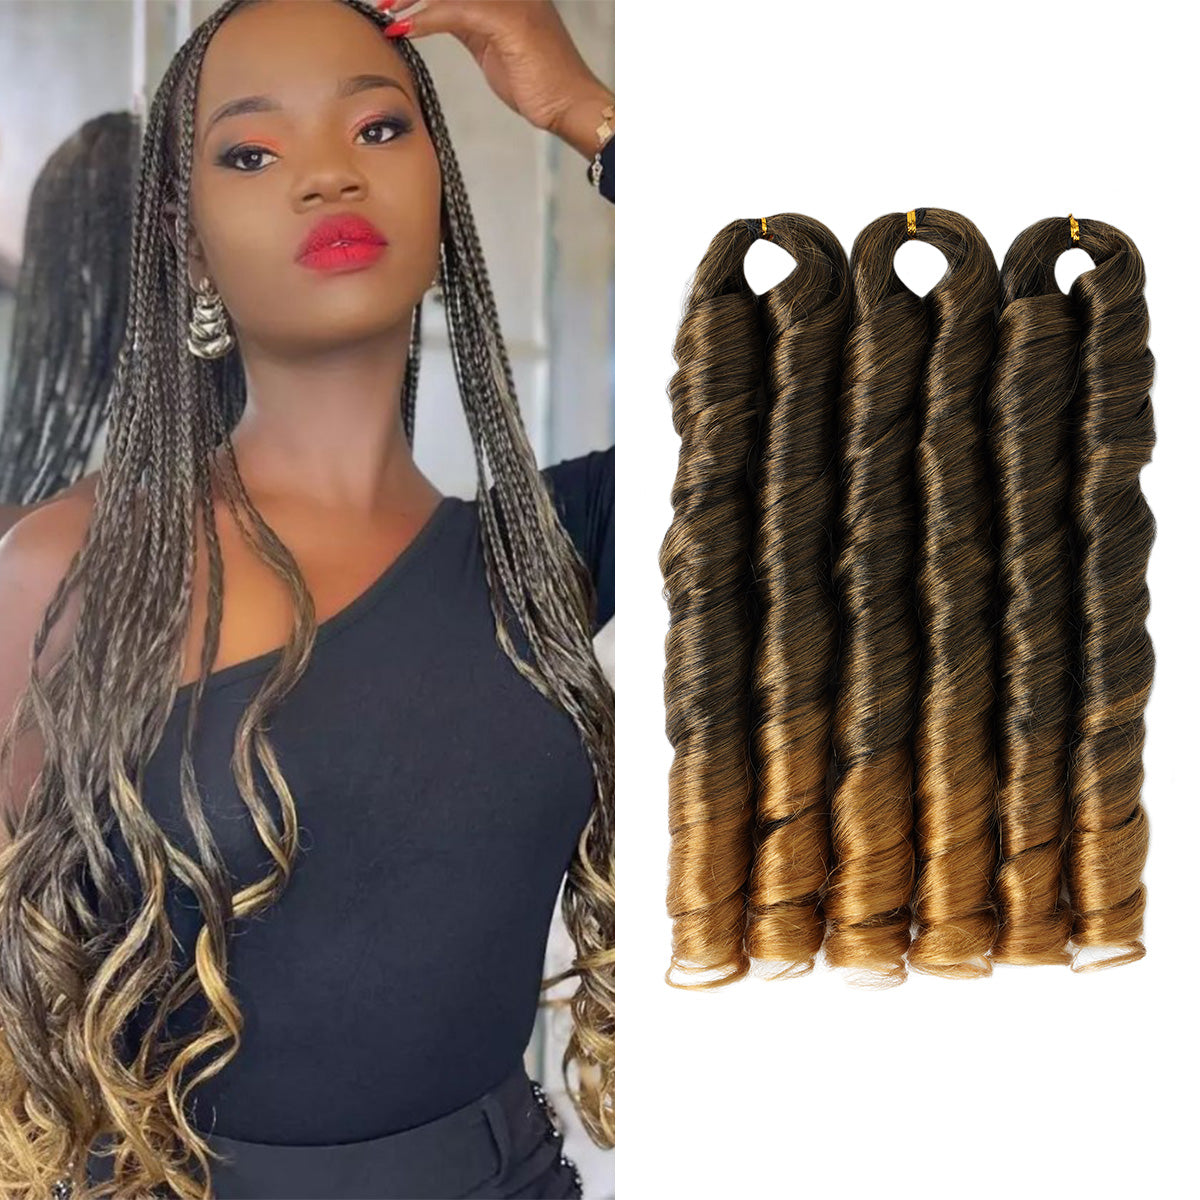 14 18 22 Inch Synthetic French Curly Crochet Braids – Misthere K. - All  rights reserved